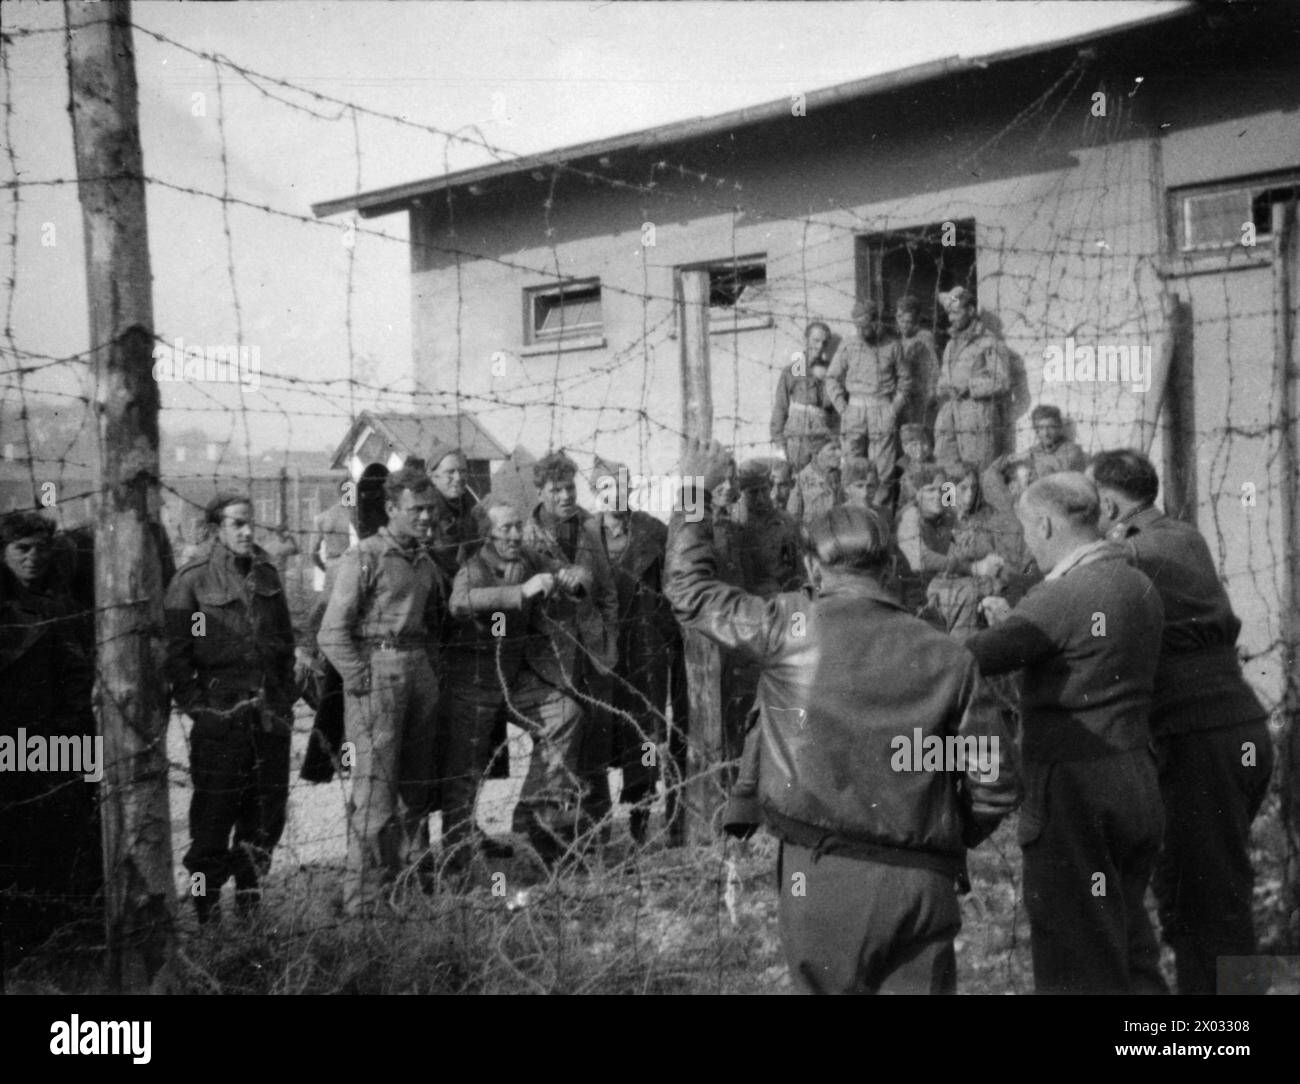 THE BRITISH ARMY IN NORTH-WEST EUROPE 1944-45 - A photograph taken covertly at Stalag VIIA at Mooseburg, showing British POWs talking to new inmates captured on the Greek island of Leros. Date unknown Stock Photo